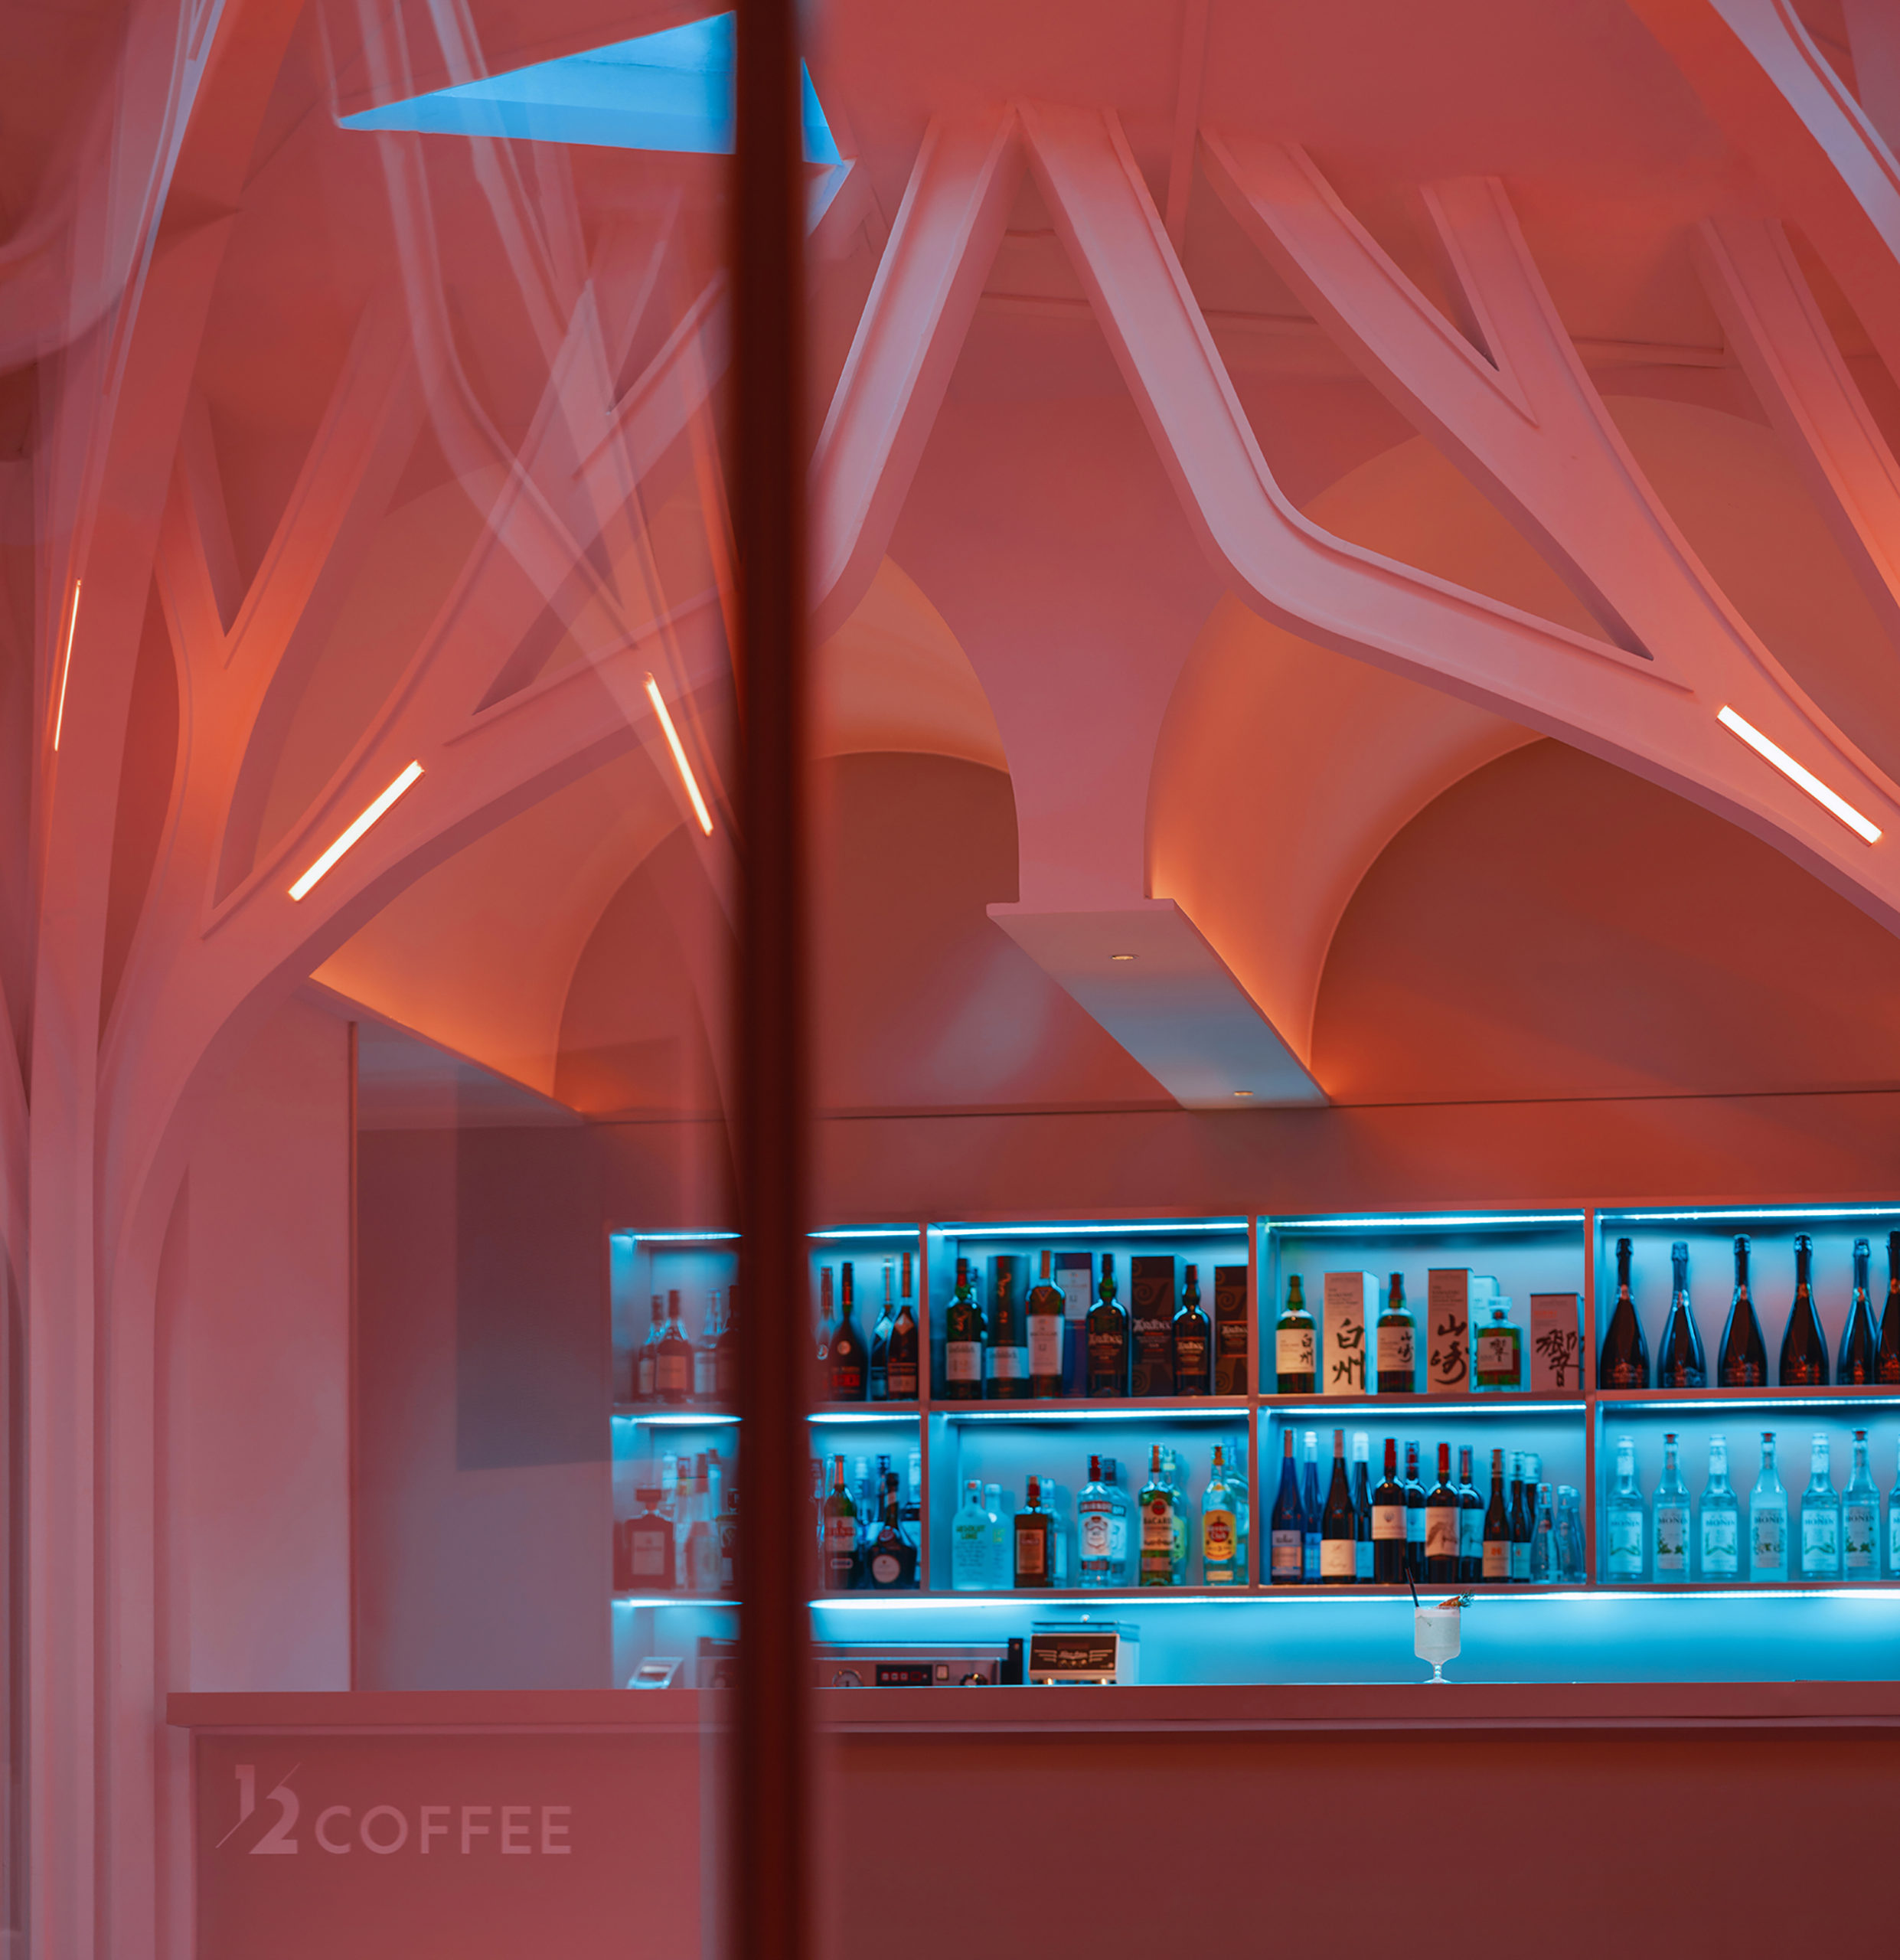 During the evening, the space transforms from serving coffee and teas to providing cocktails. This change is visually supported by the space’s dynamic lighting.